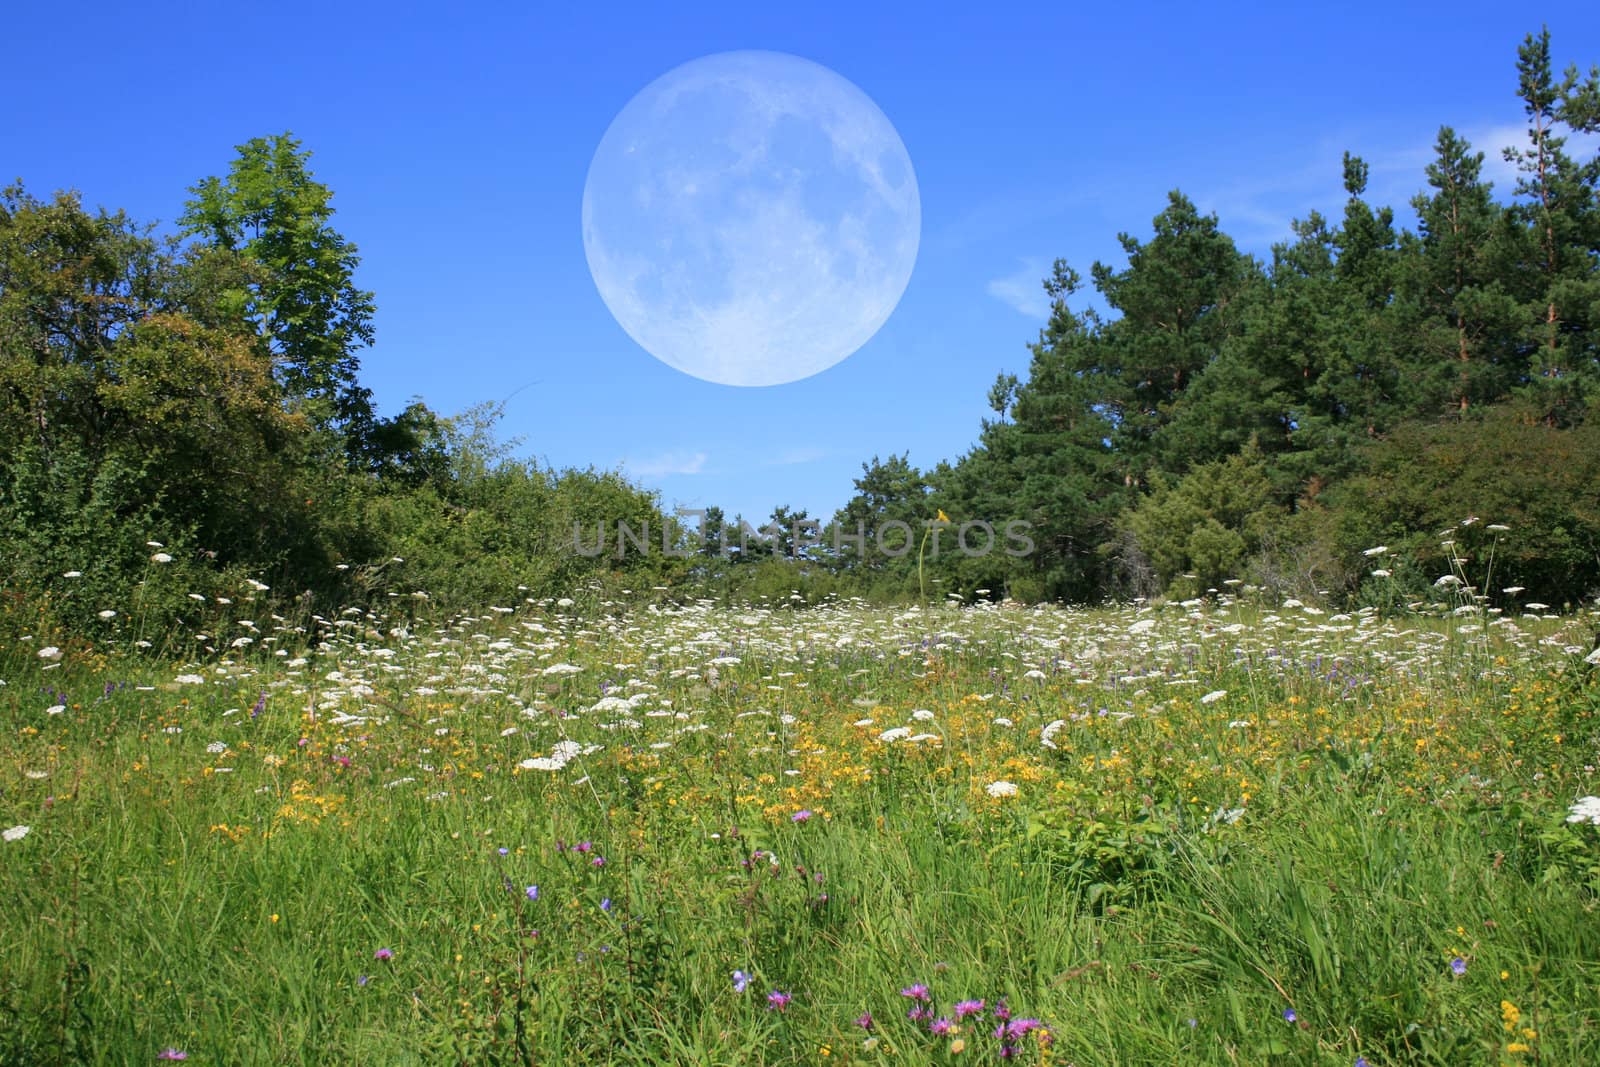 this image shows a wildflower meadow with full moon